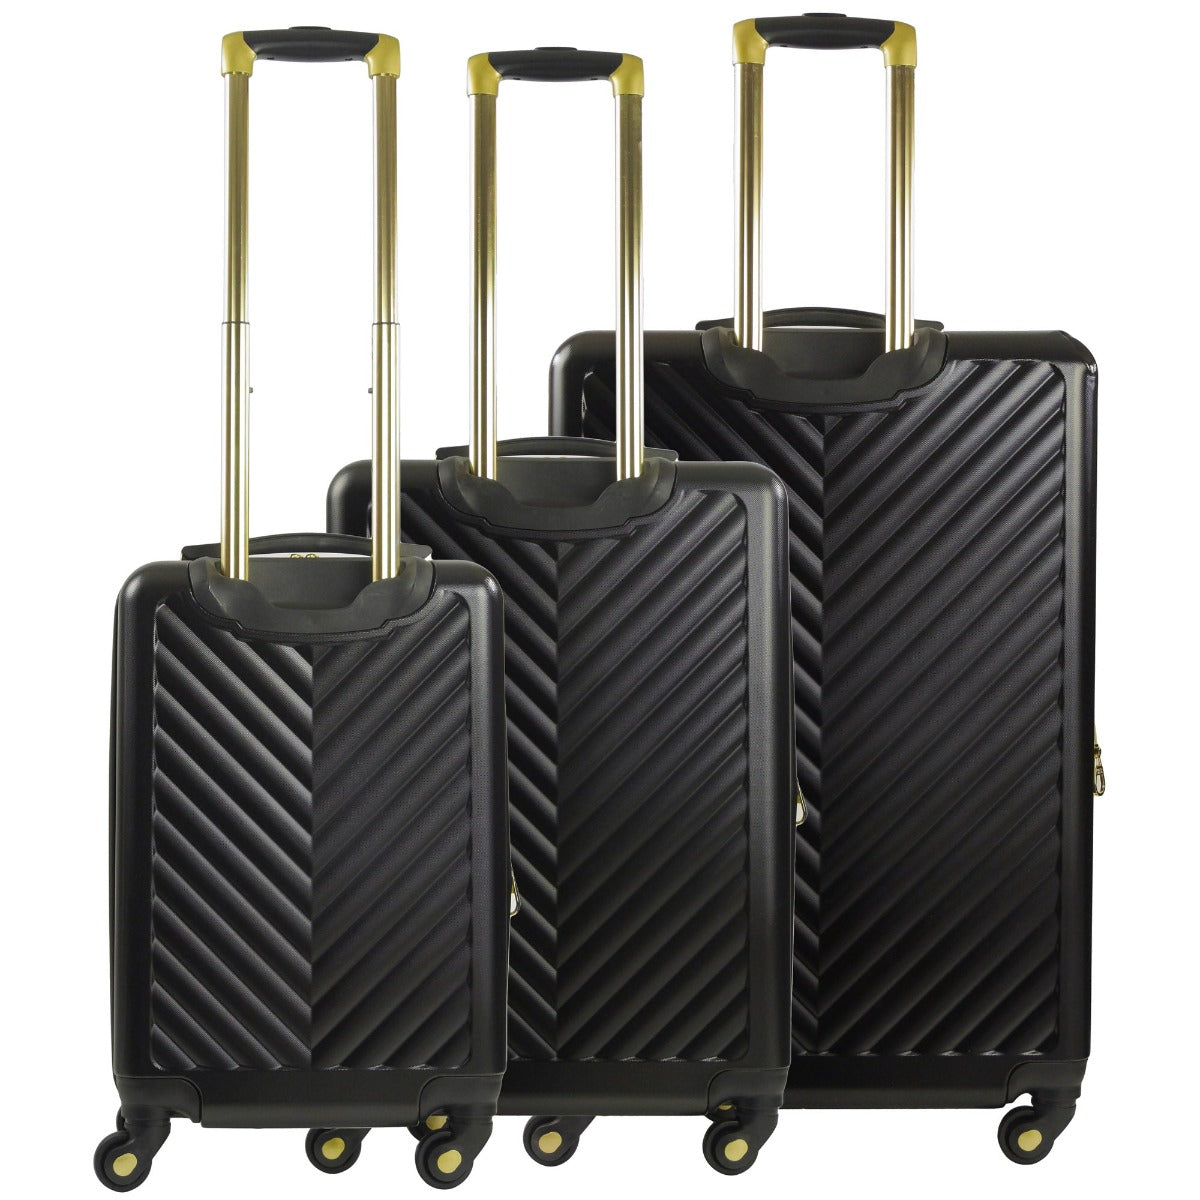 Christian Siriano Addie 3 piece hardside spinner luggage set black - best durable travel suitcases